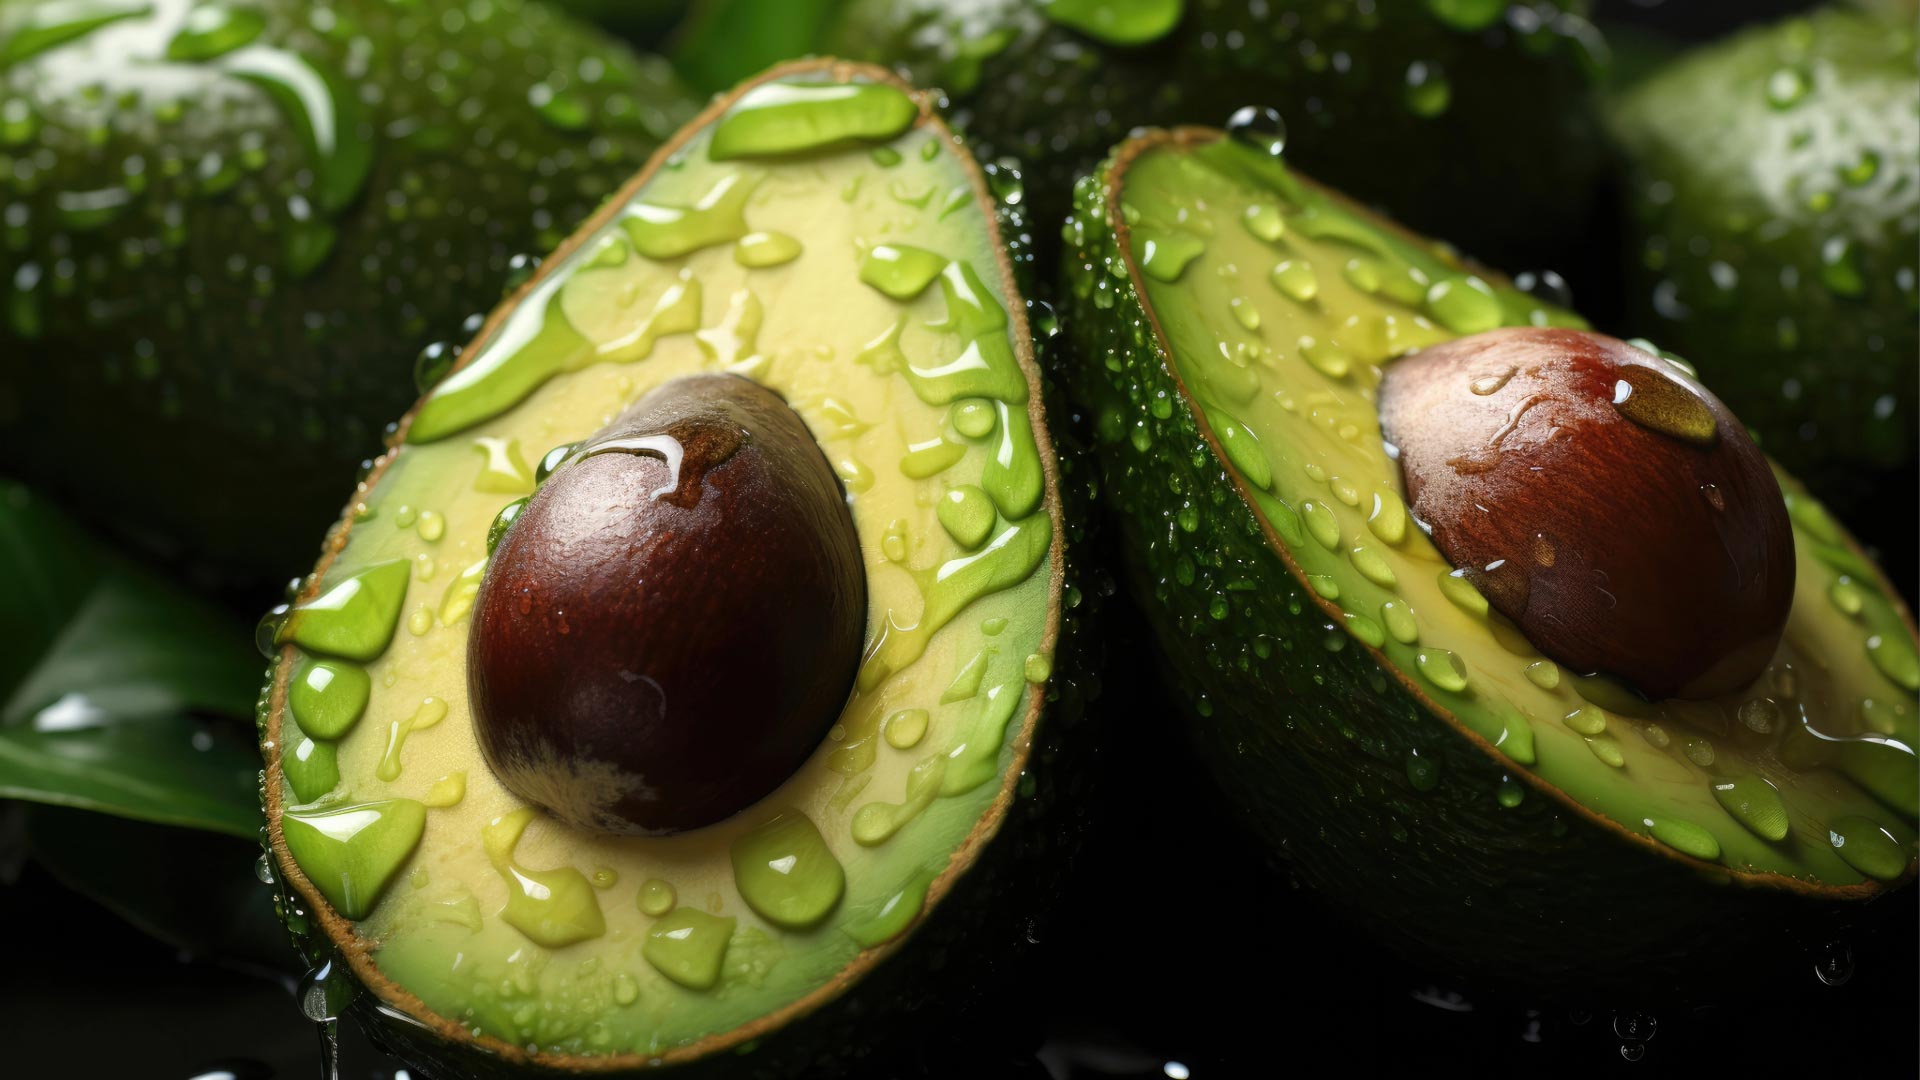 Avocados sliced in two with water drops on them